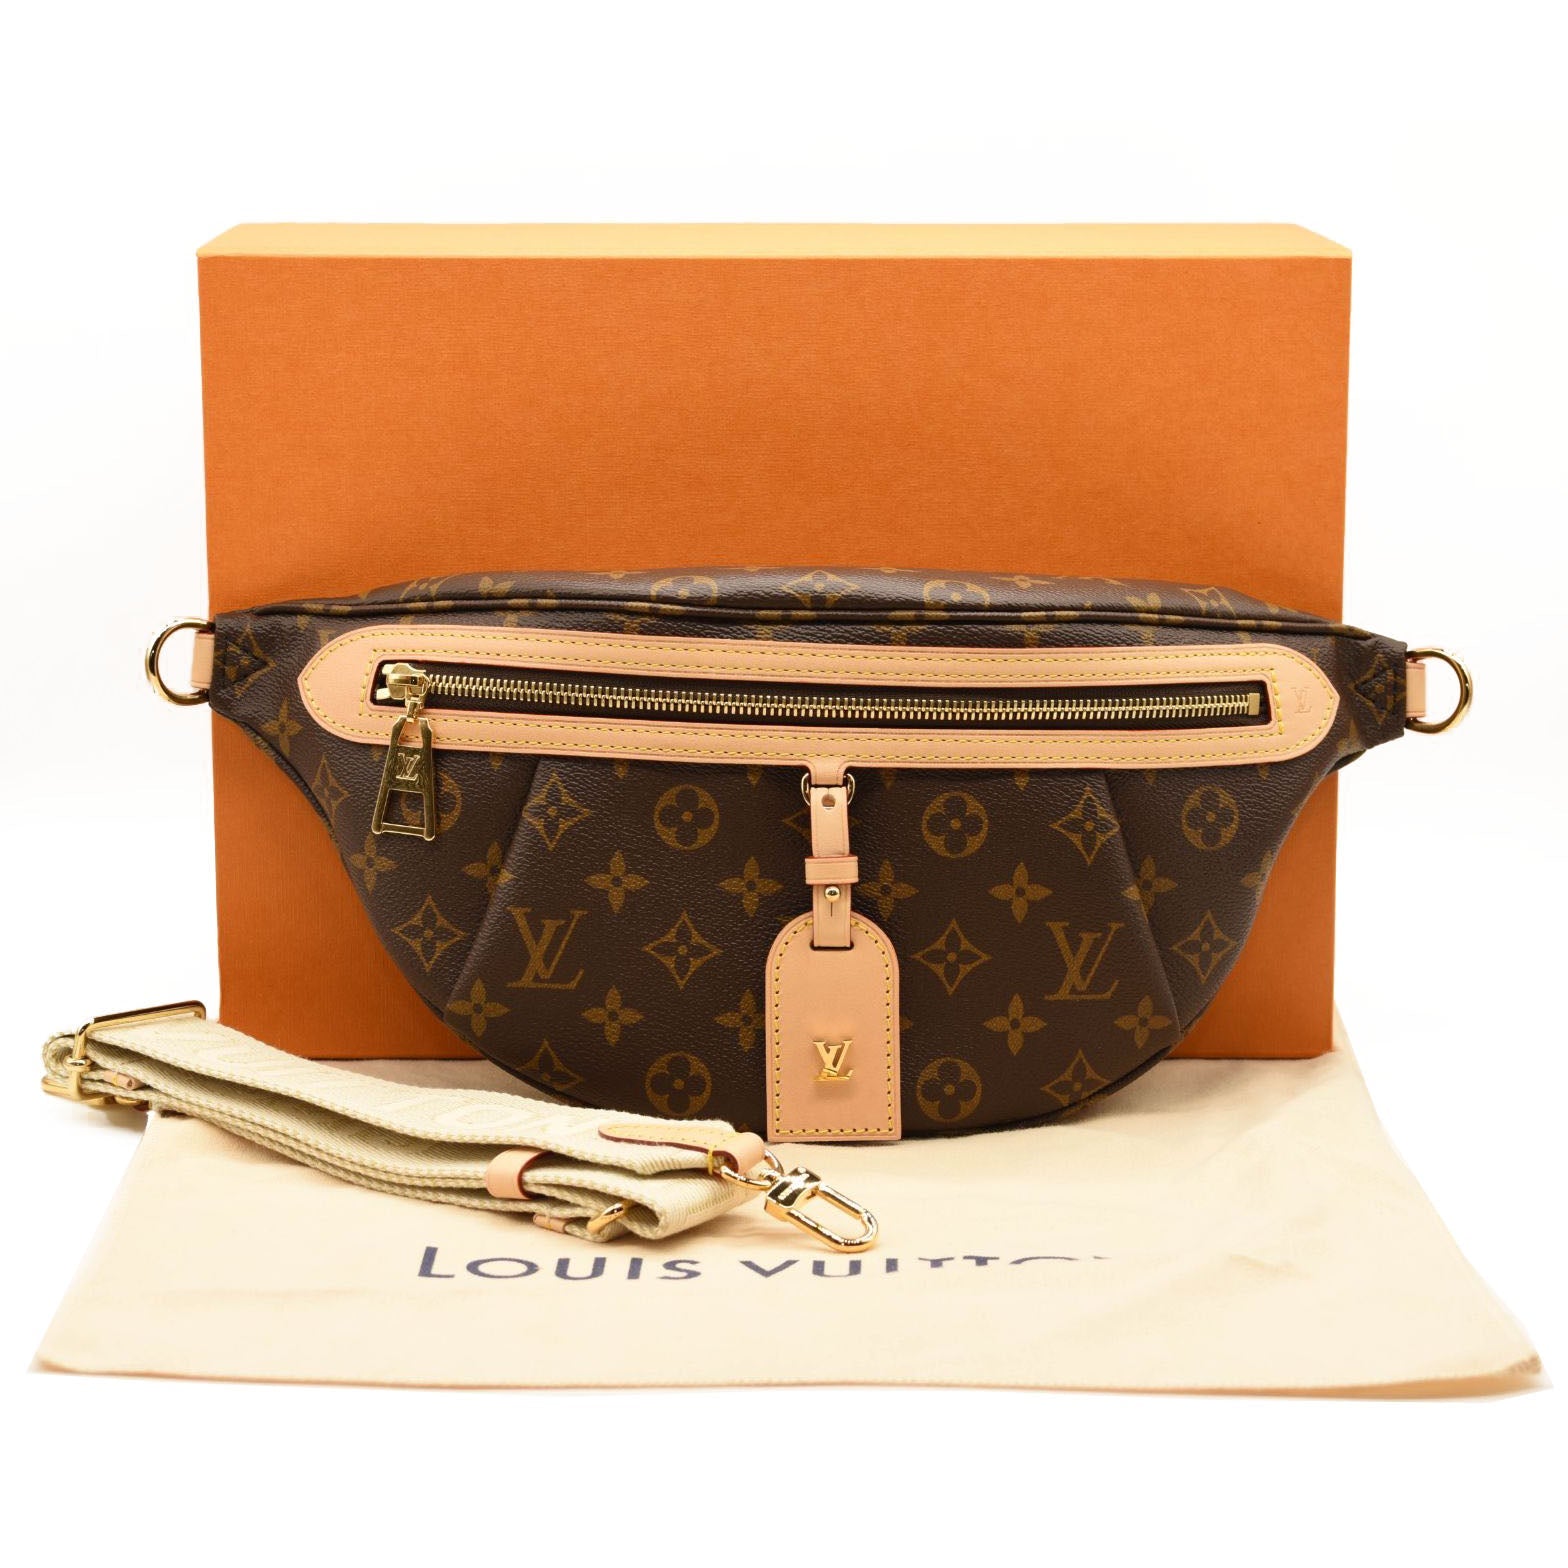 Louis Vuitton High Rise Bumbag Monogram in Coated Canvas with Gold